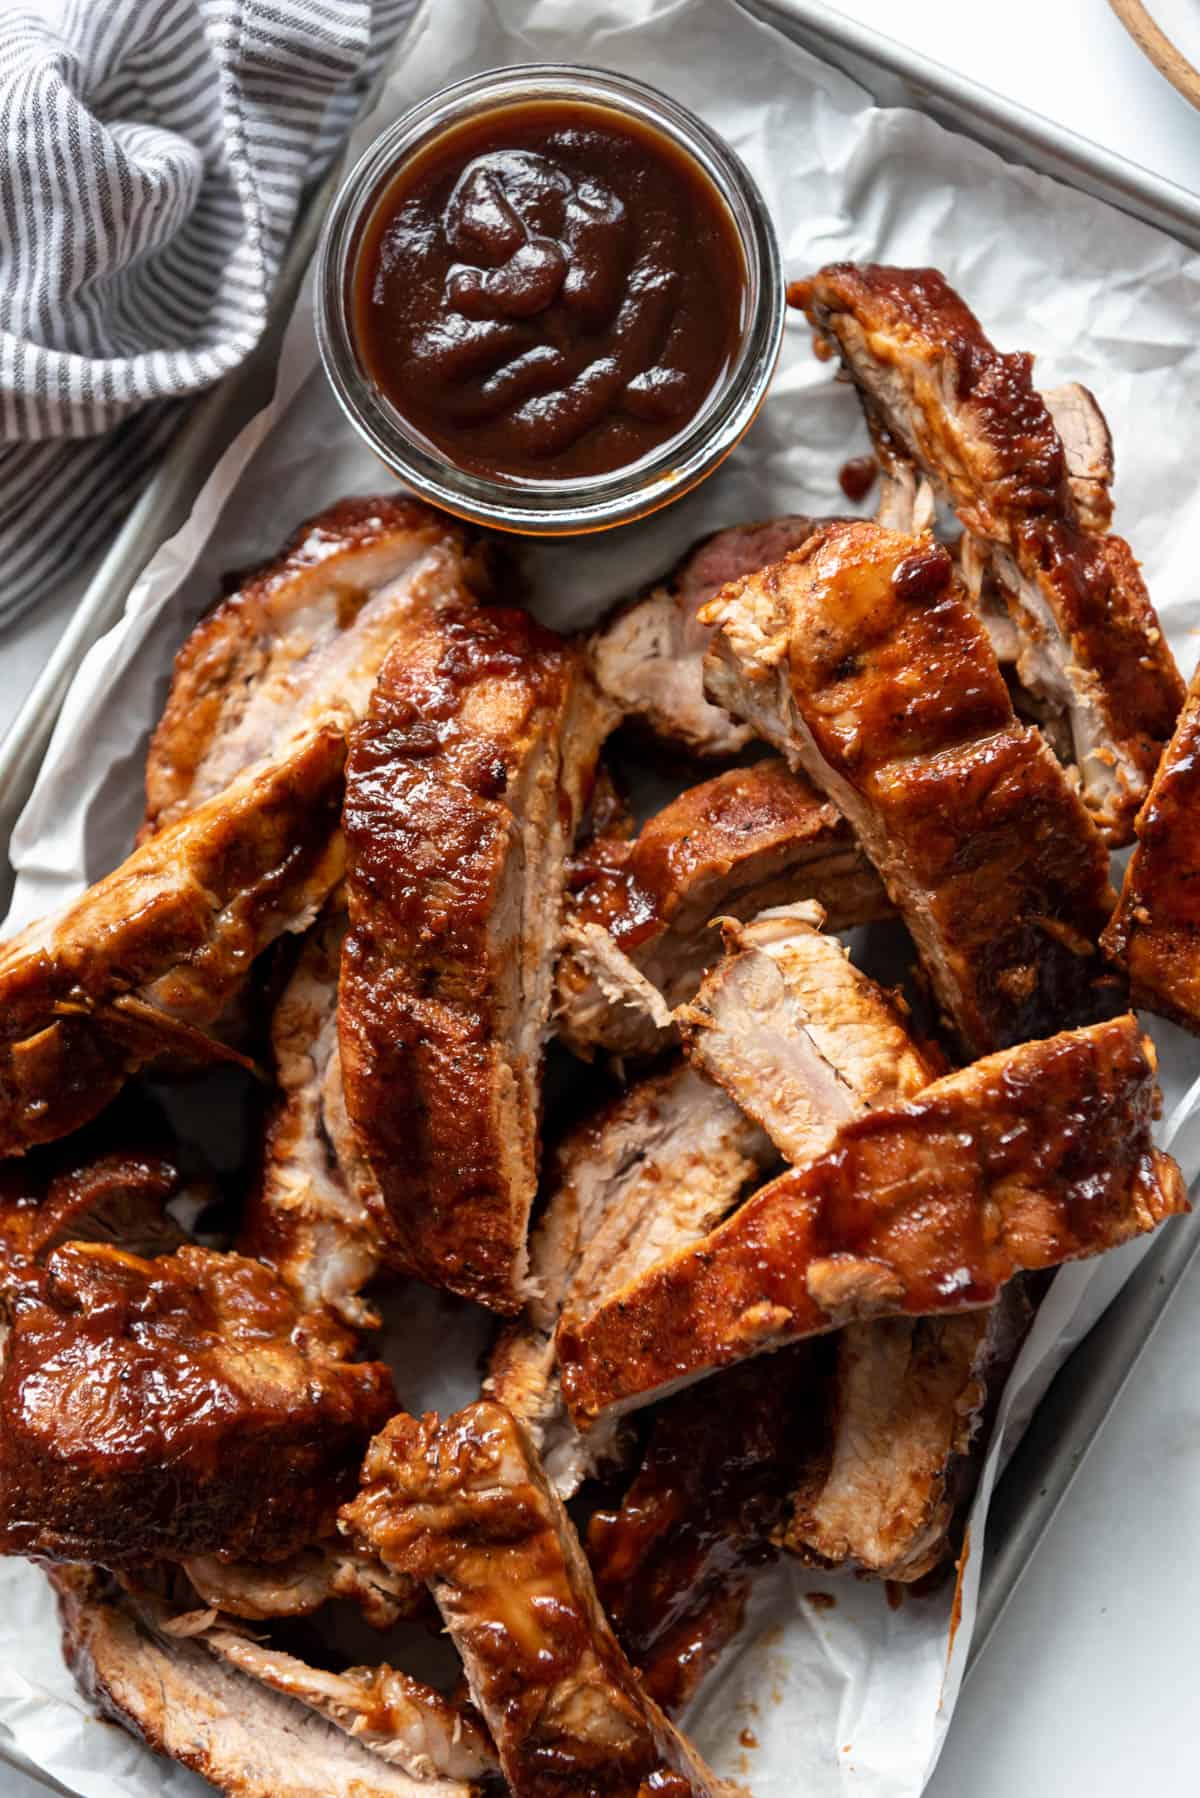 A pile of bbq baby back ribs next to a jar of sauce.